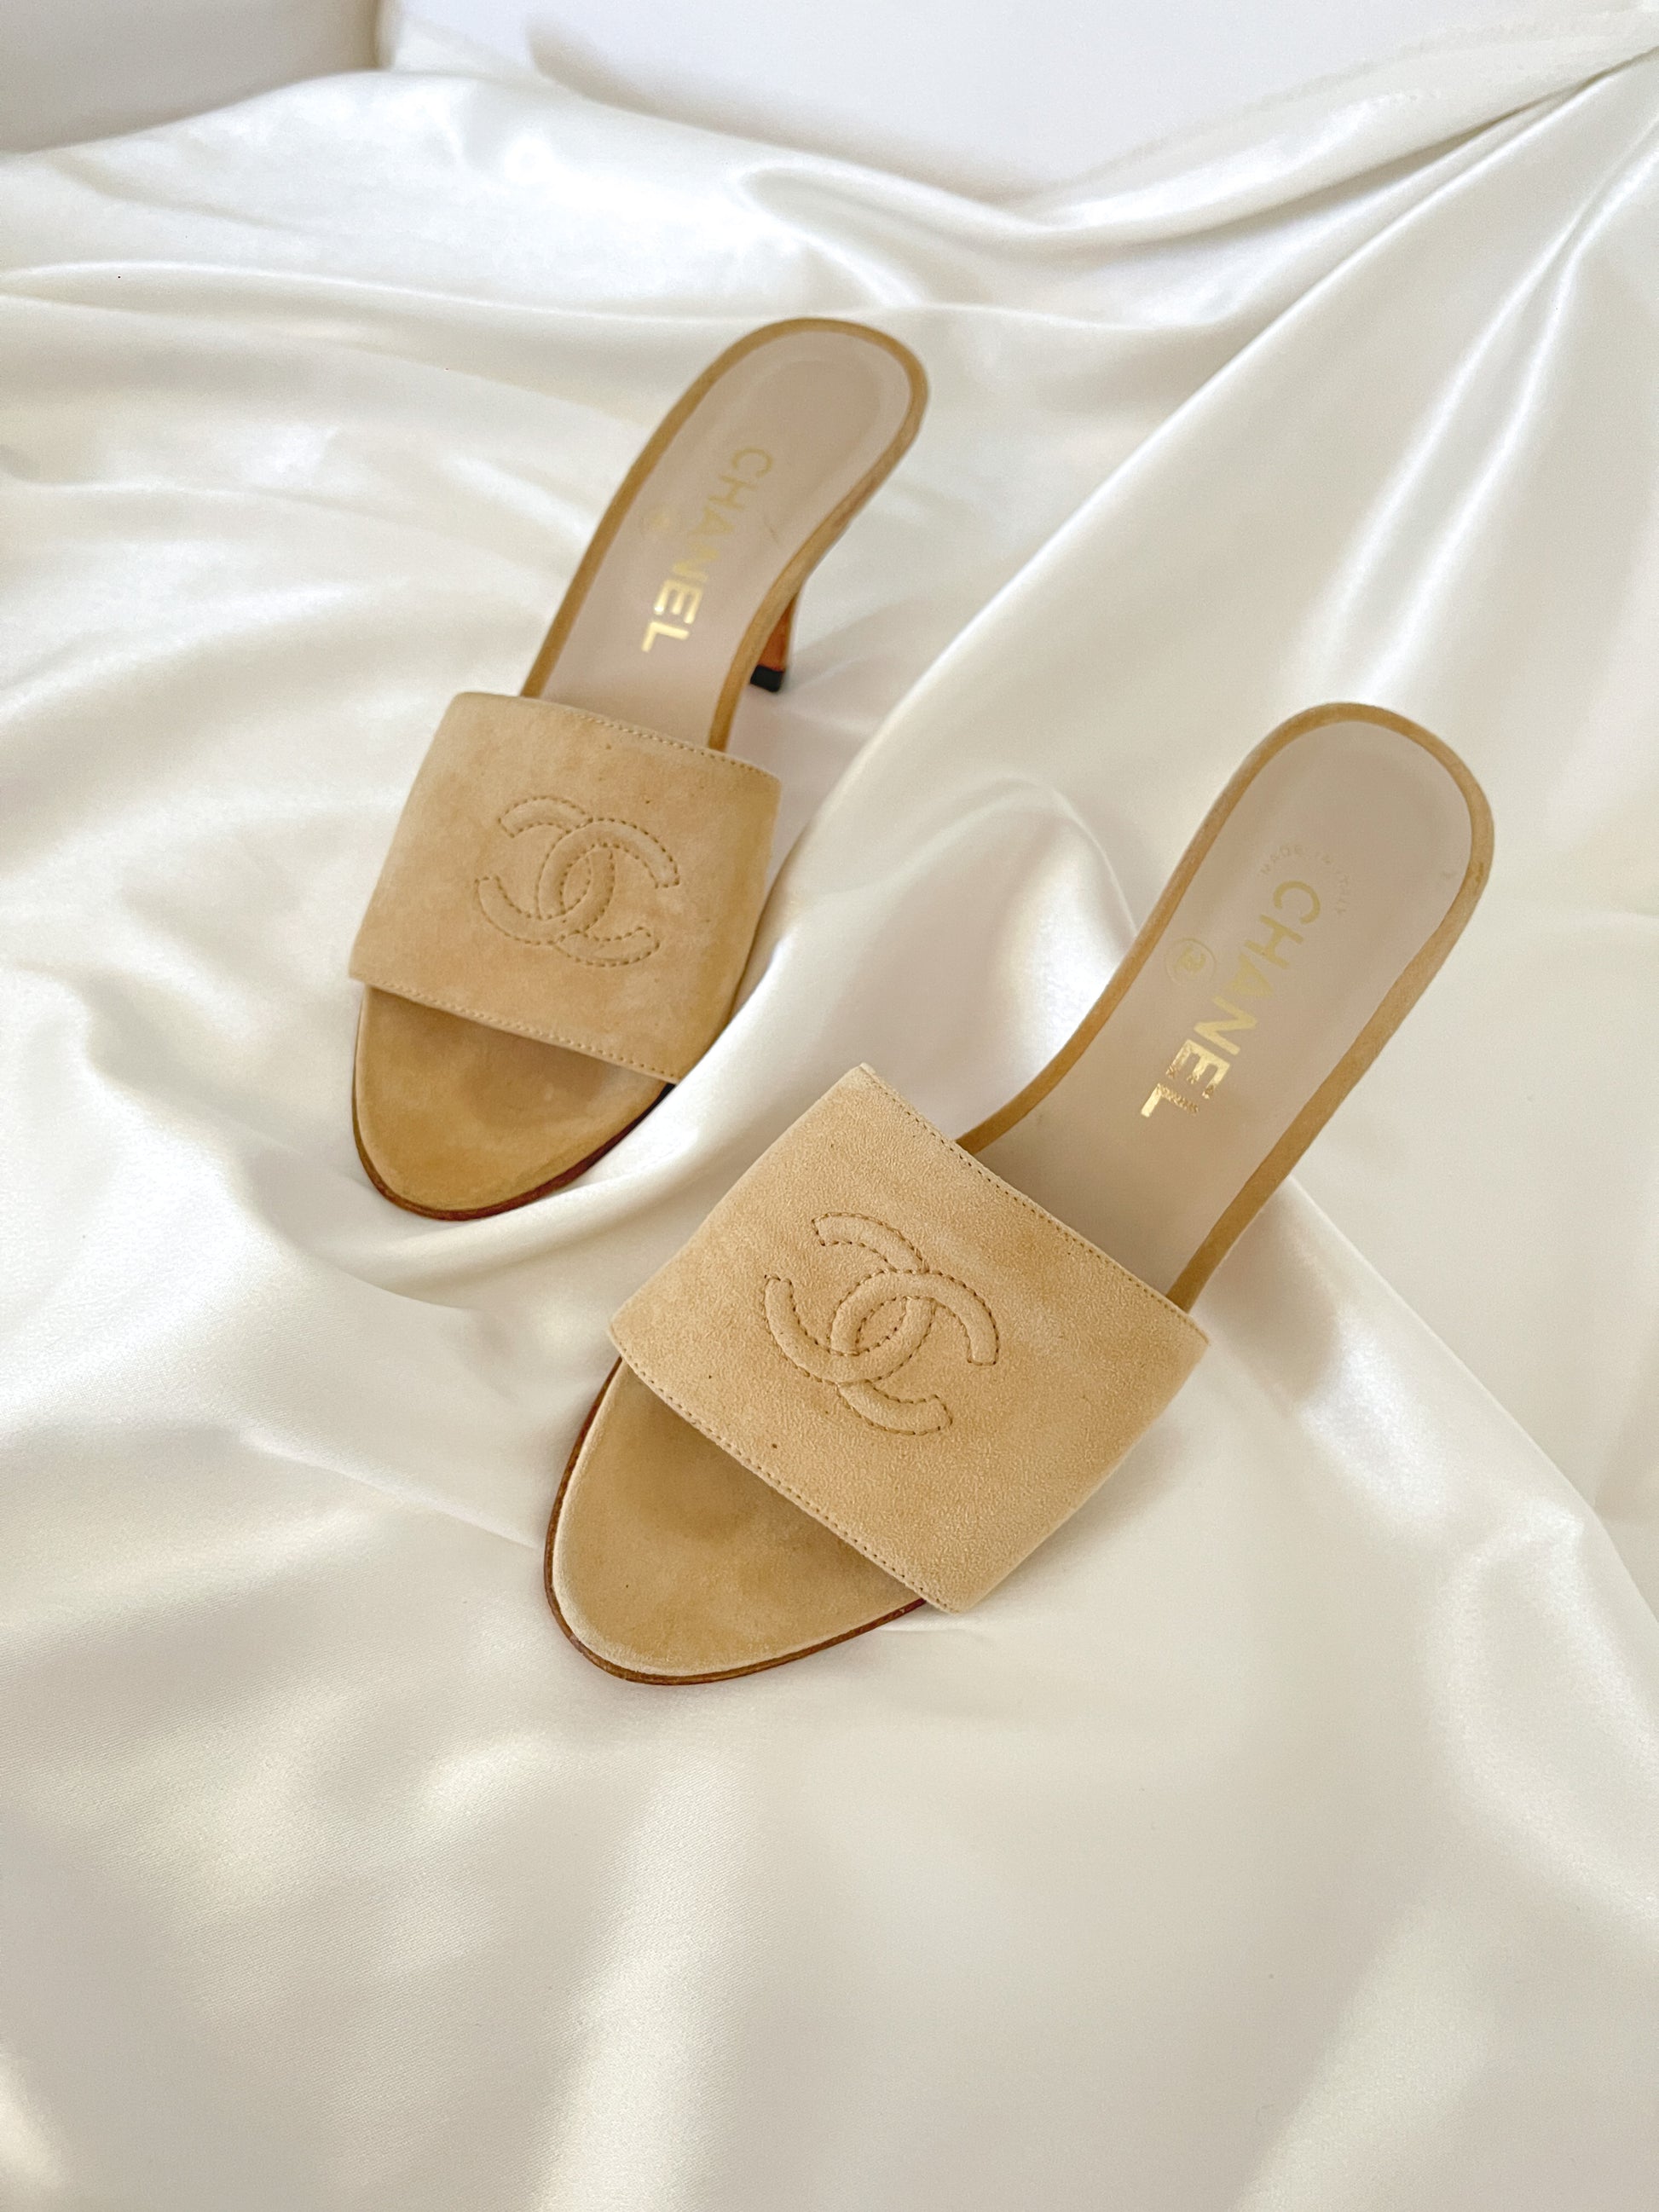 CHANEL Bow Vintage Mules, 37.5